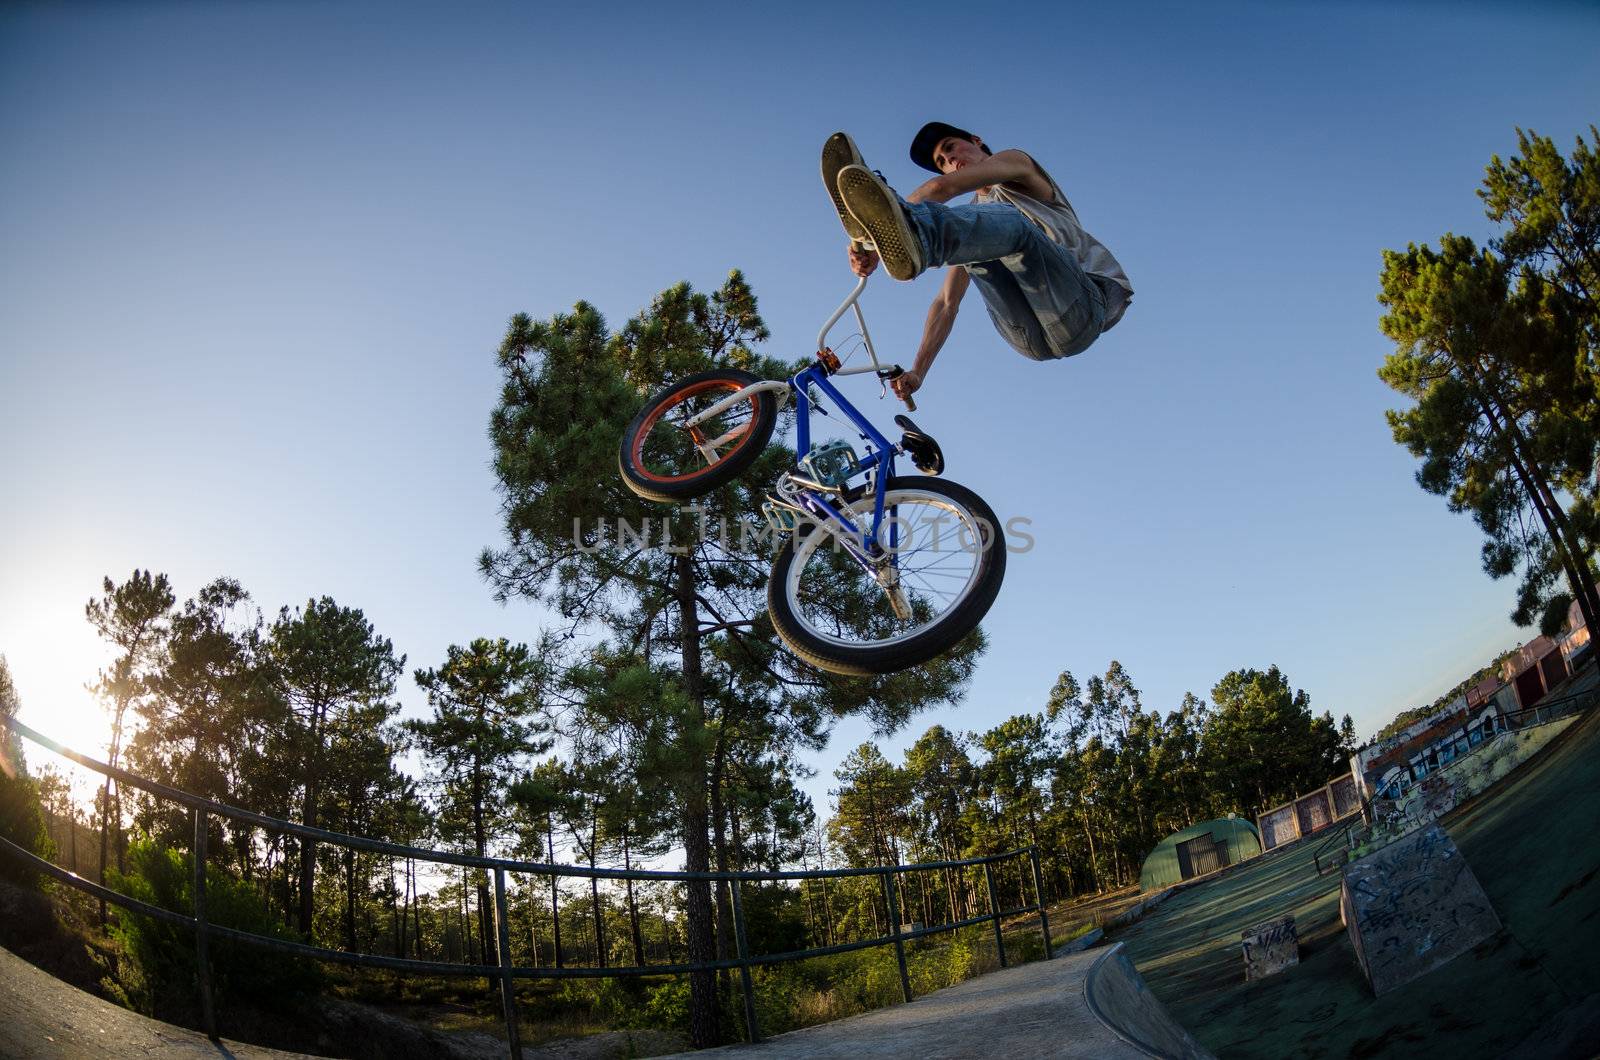 Bmx rider performing a can-can at a quarter pipe ramp on a skatepark.